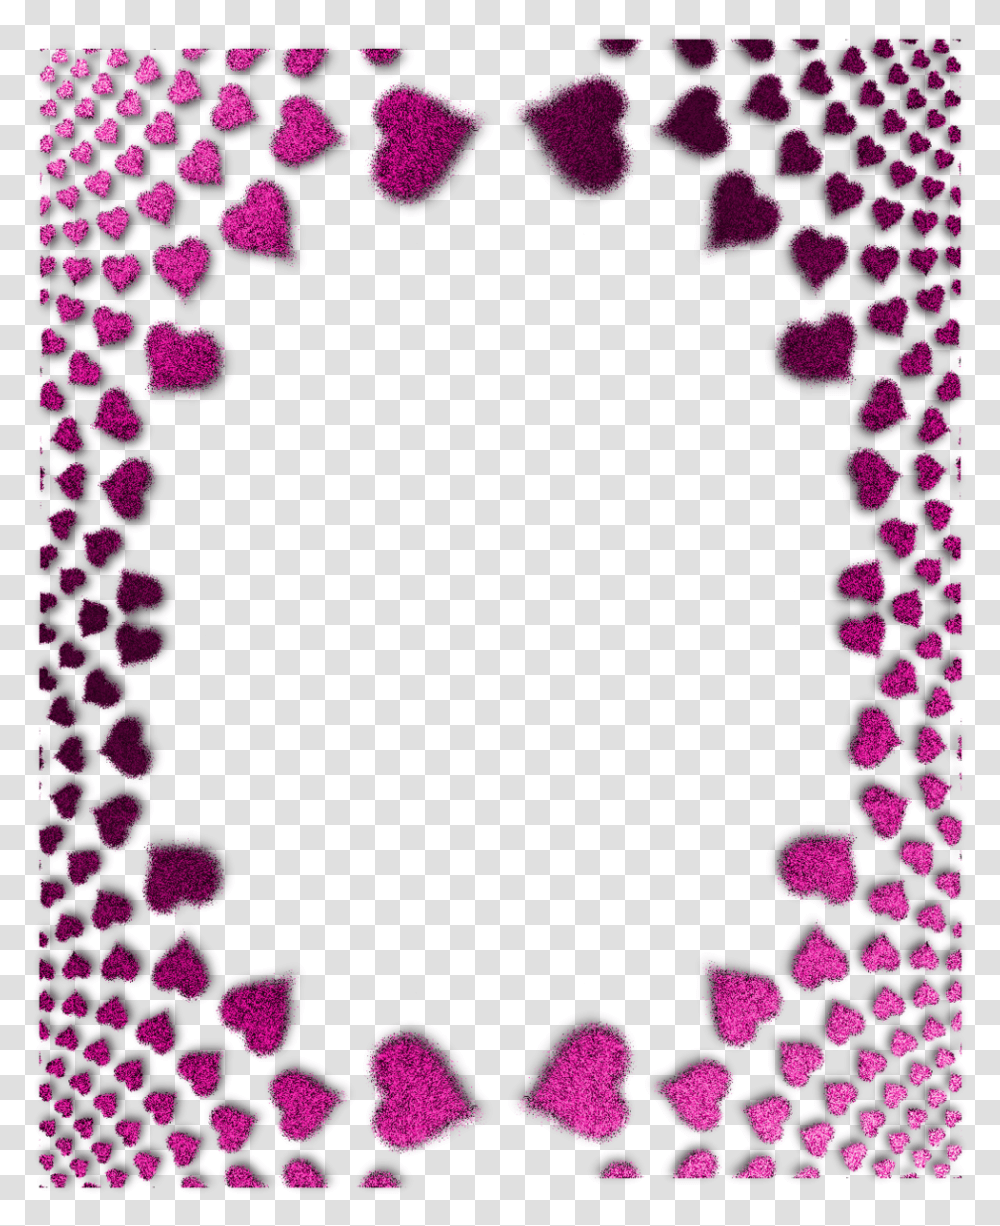 More Like Black And Pink Frame By Julee San By Border Design Clipart Hd, Purple, Rug, Pattern, Texture Transparent Png